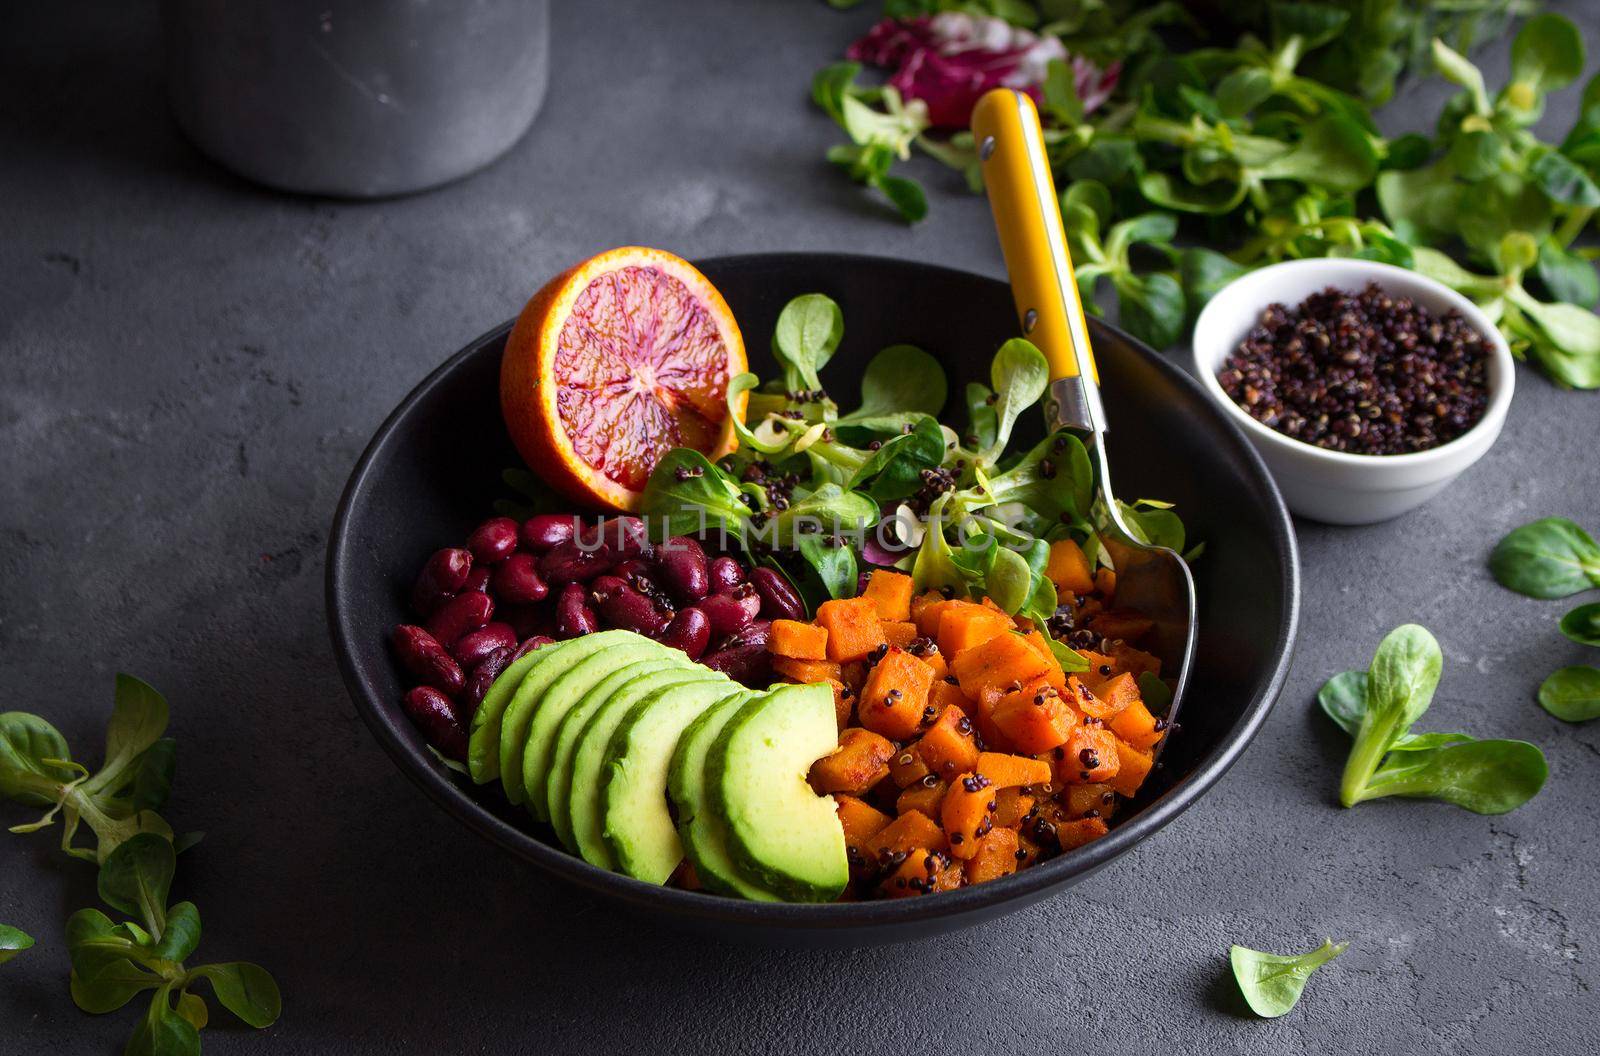 Quinoa salad in bowl with avocado, sweet potato, beans, herbs, orange on concrete rustic background. Quinoa superfood concept. Clean healthy detox eating. Vegan/vegetarian food. Making healthy salad